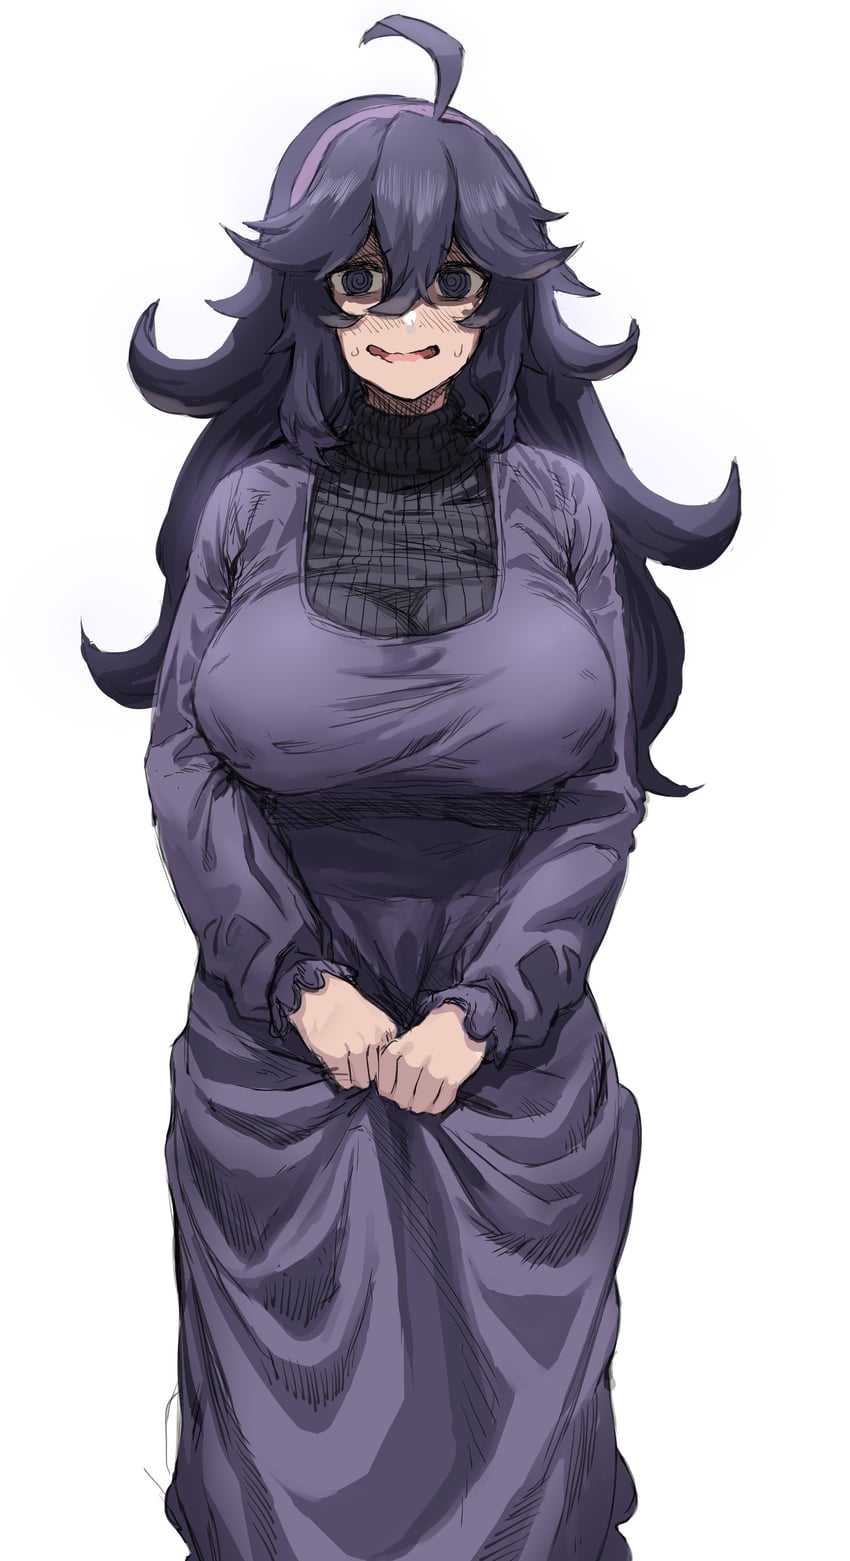 hex maniac (pokemon and 2 more) drawn by awesomeerix